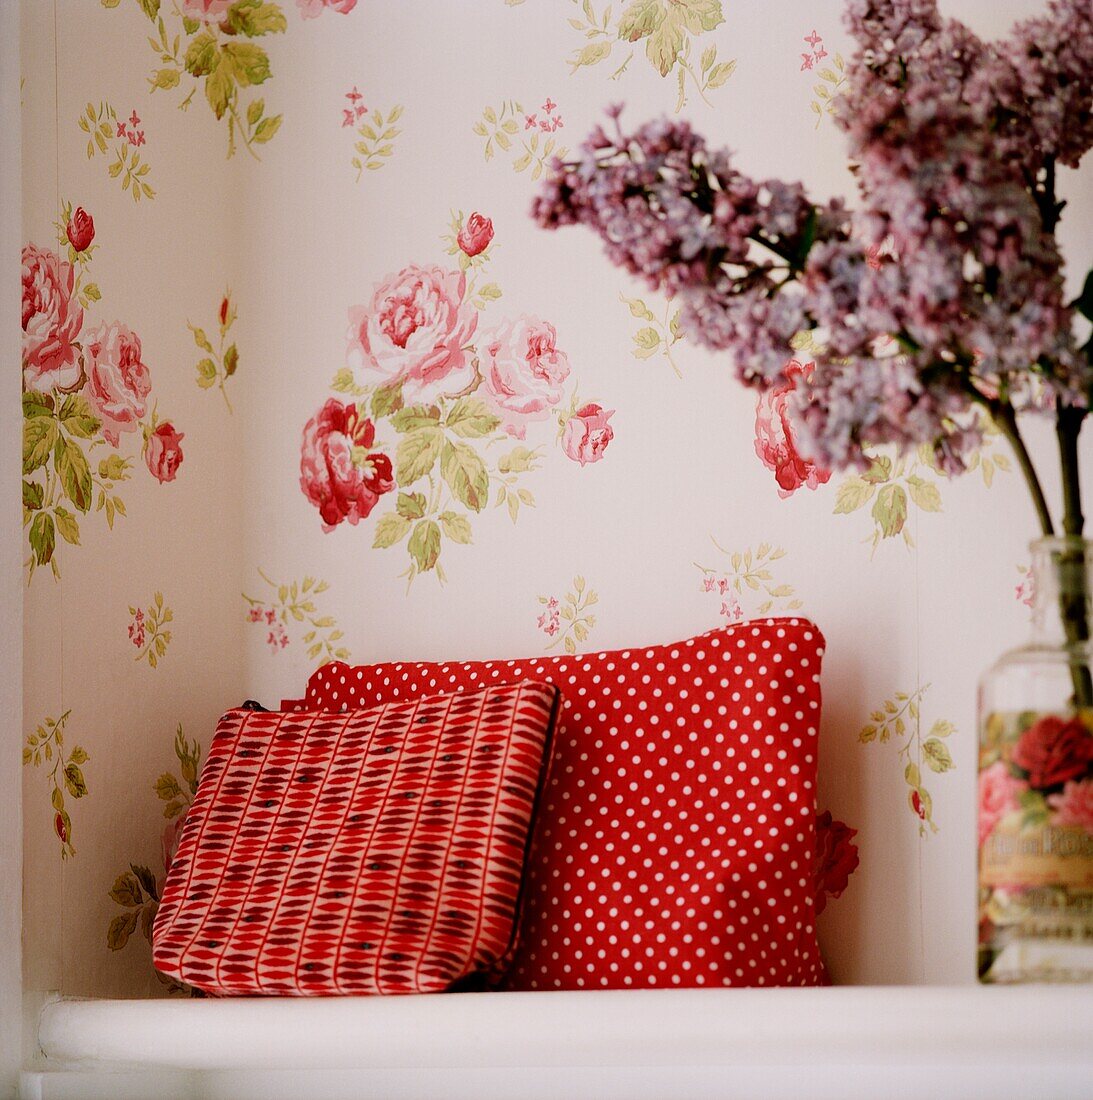 Red washbags with lilac on shelf with floral wallpaper